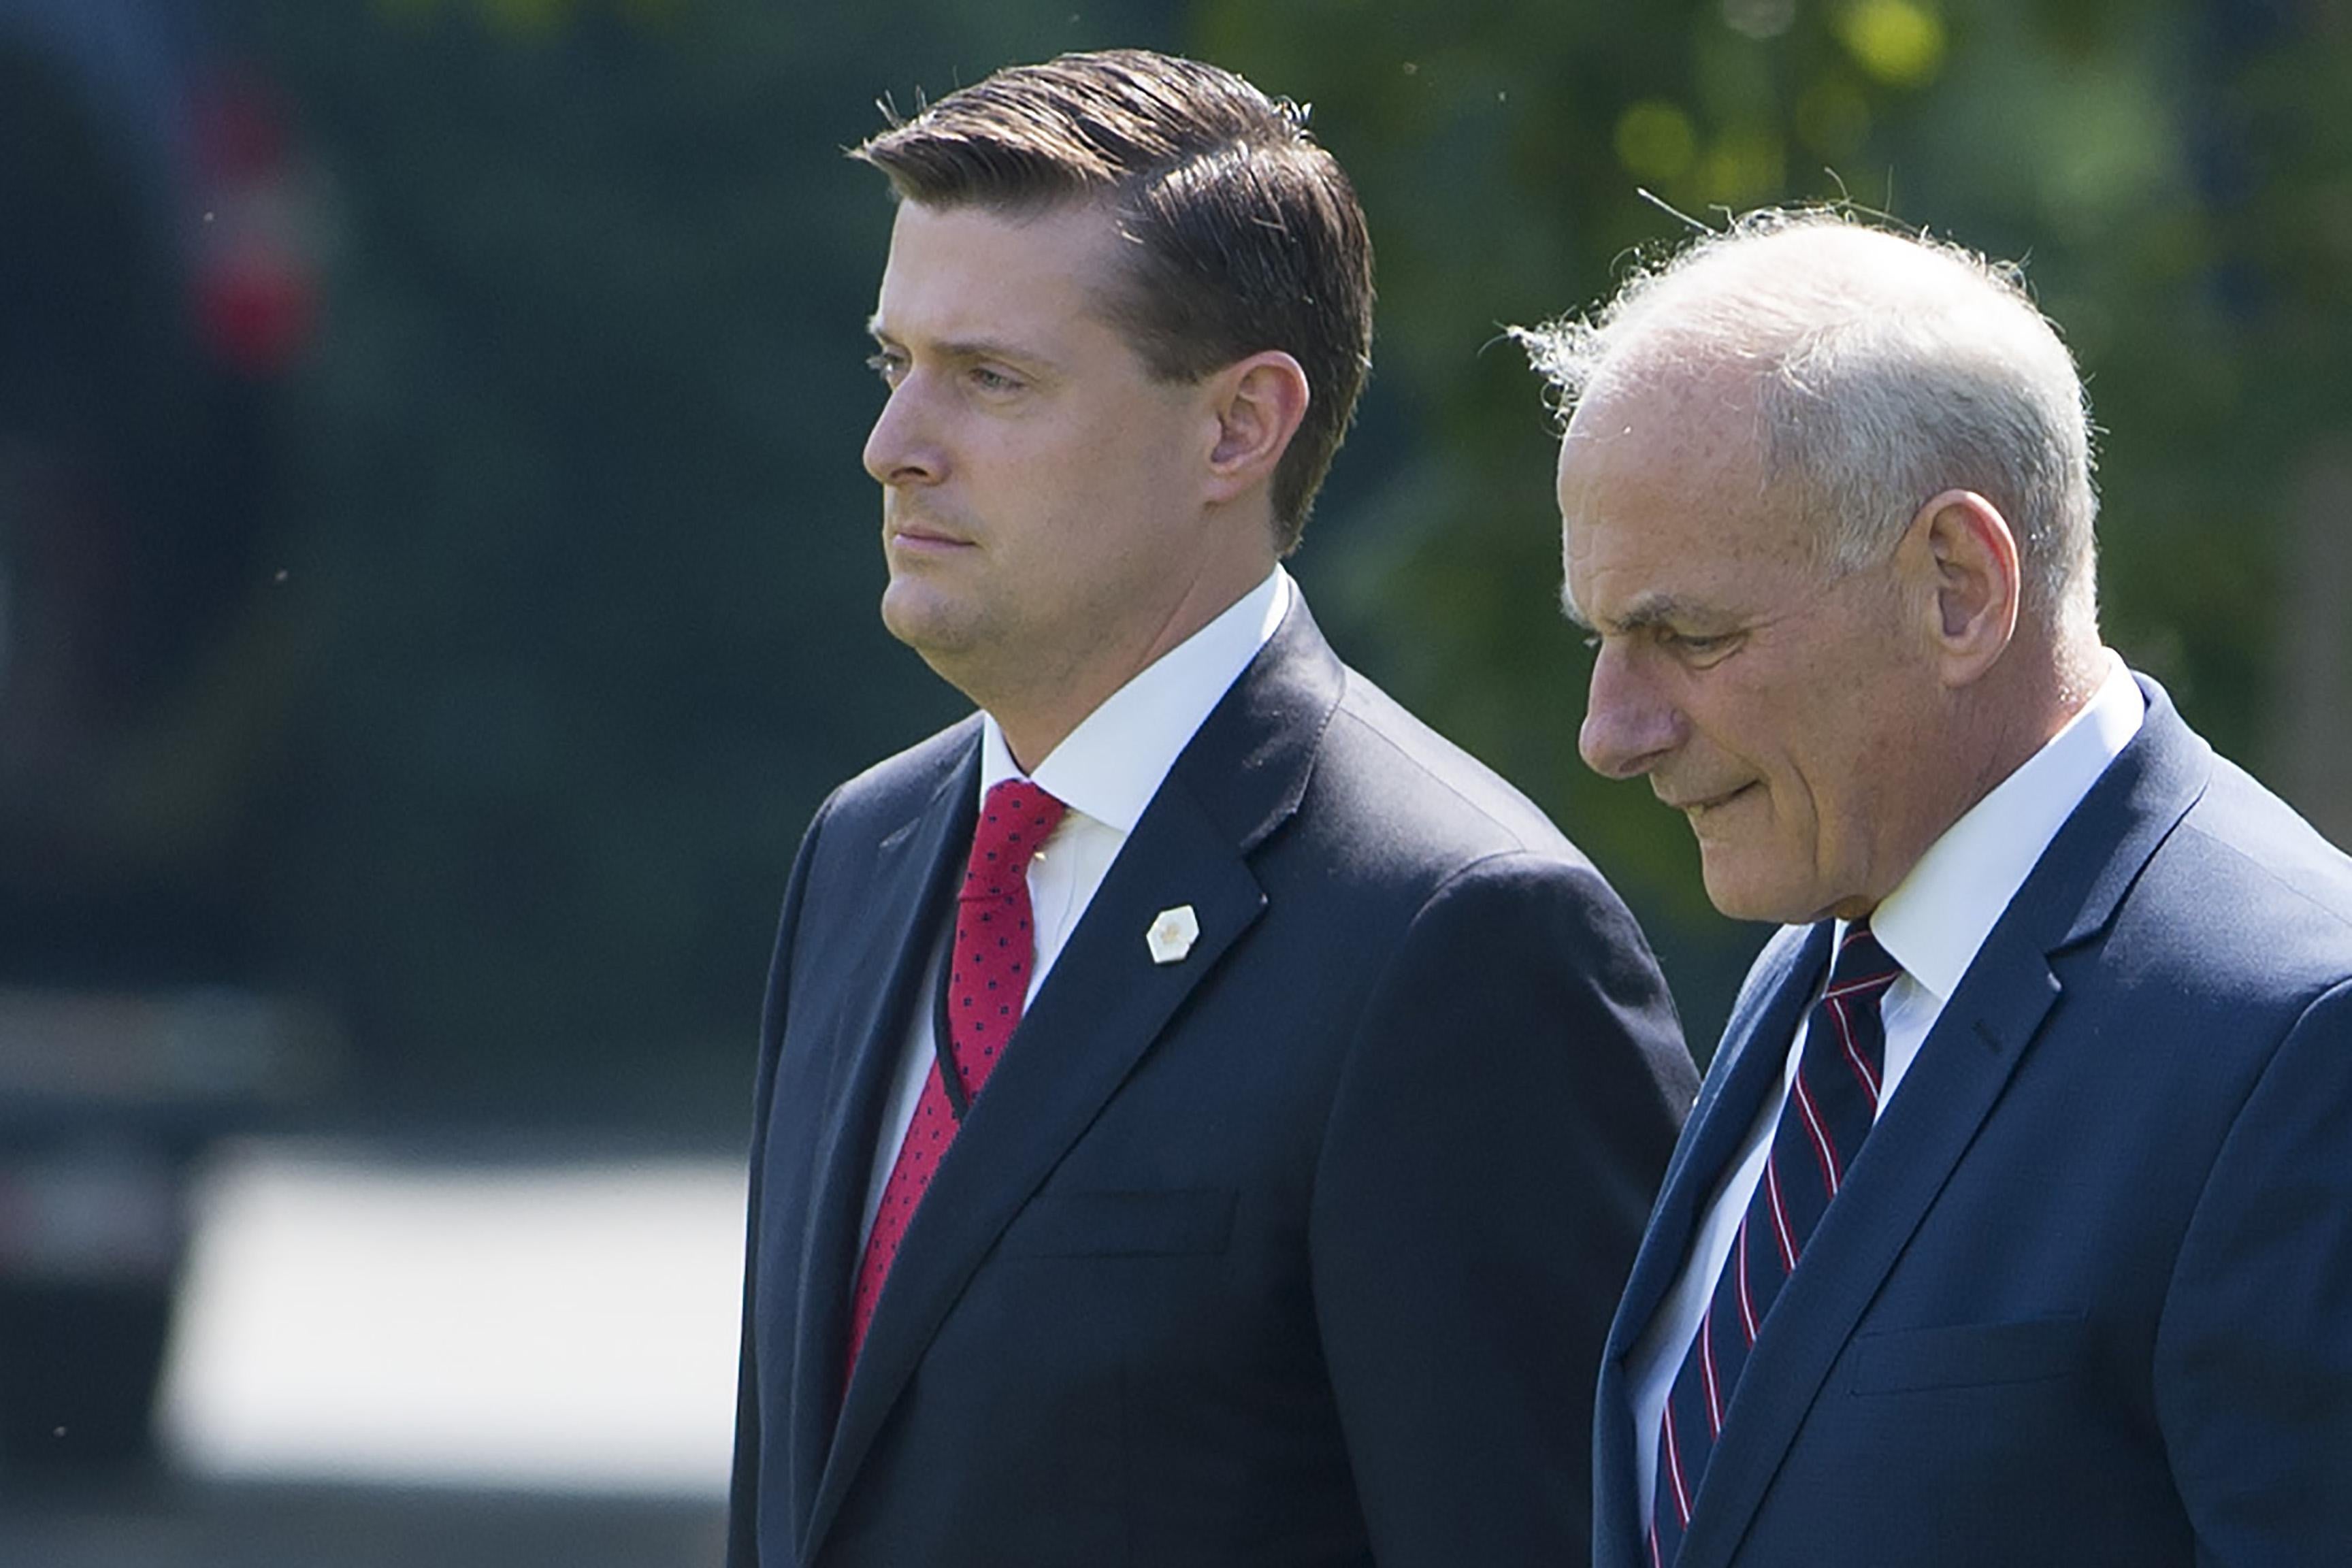 White House Chief of Staff John Kelly (R) and Former White House Staff Secretary Rob Porter (L) outside the White House on August 4, 2017.